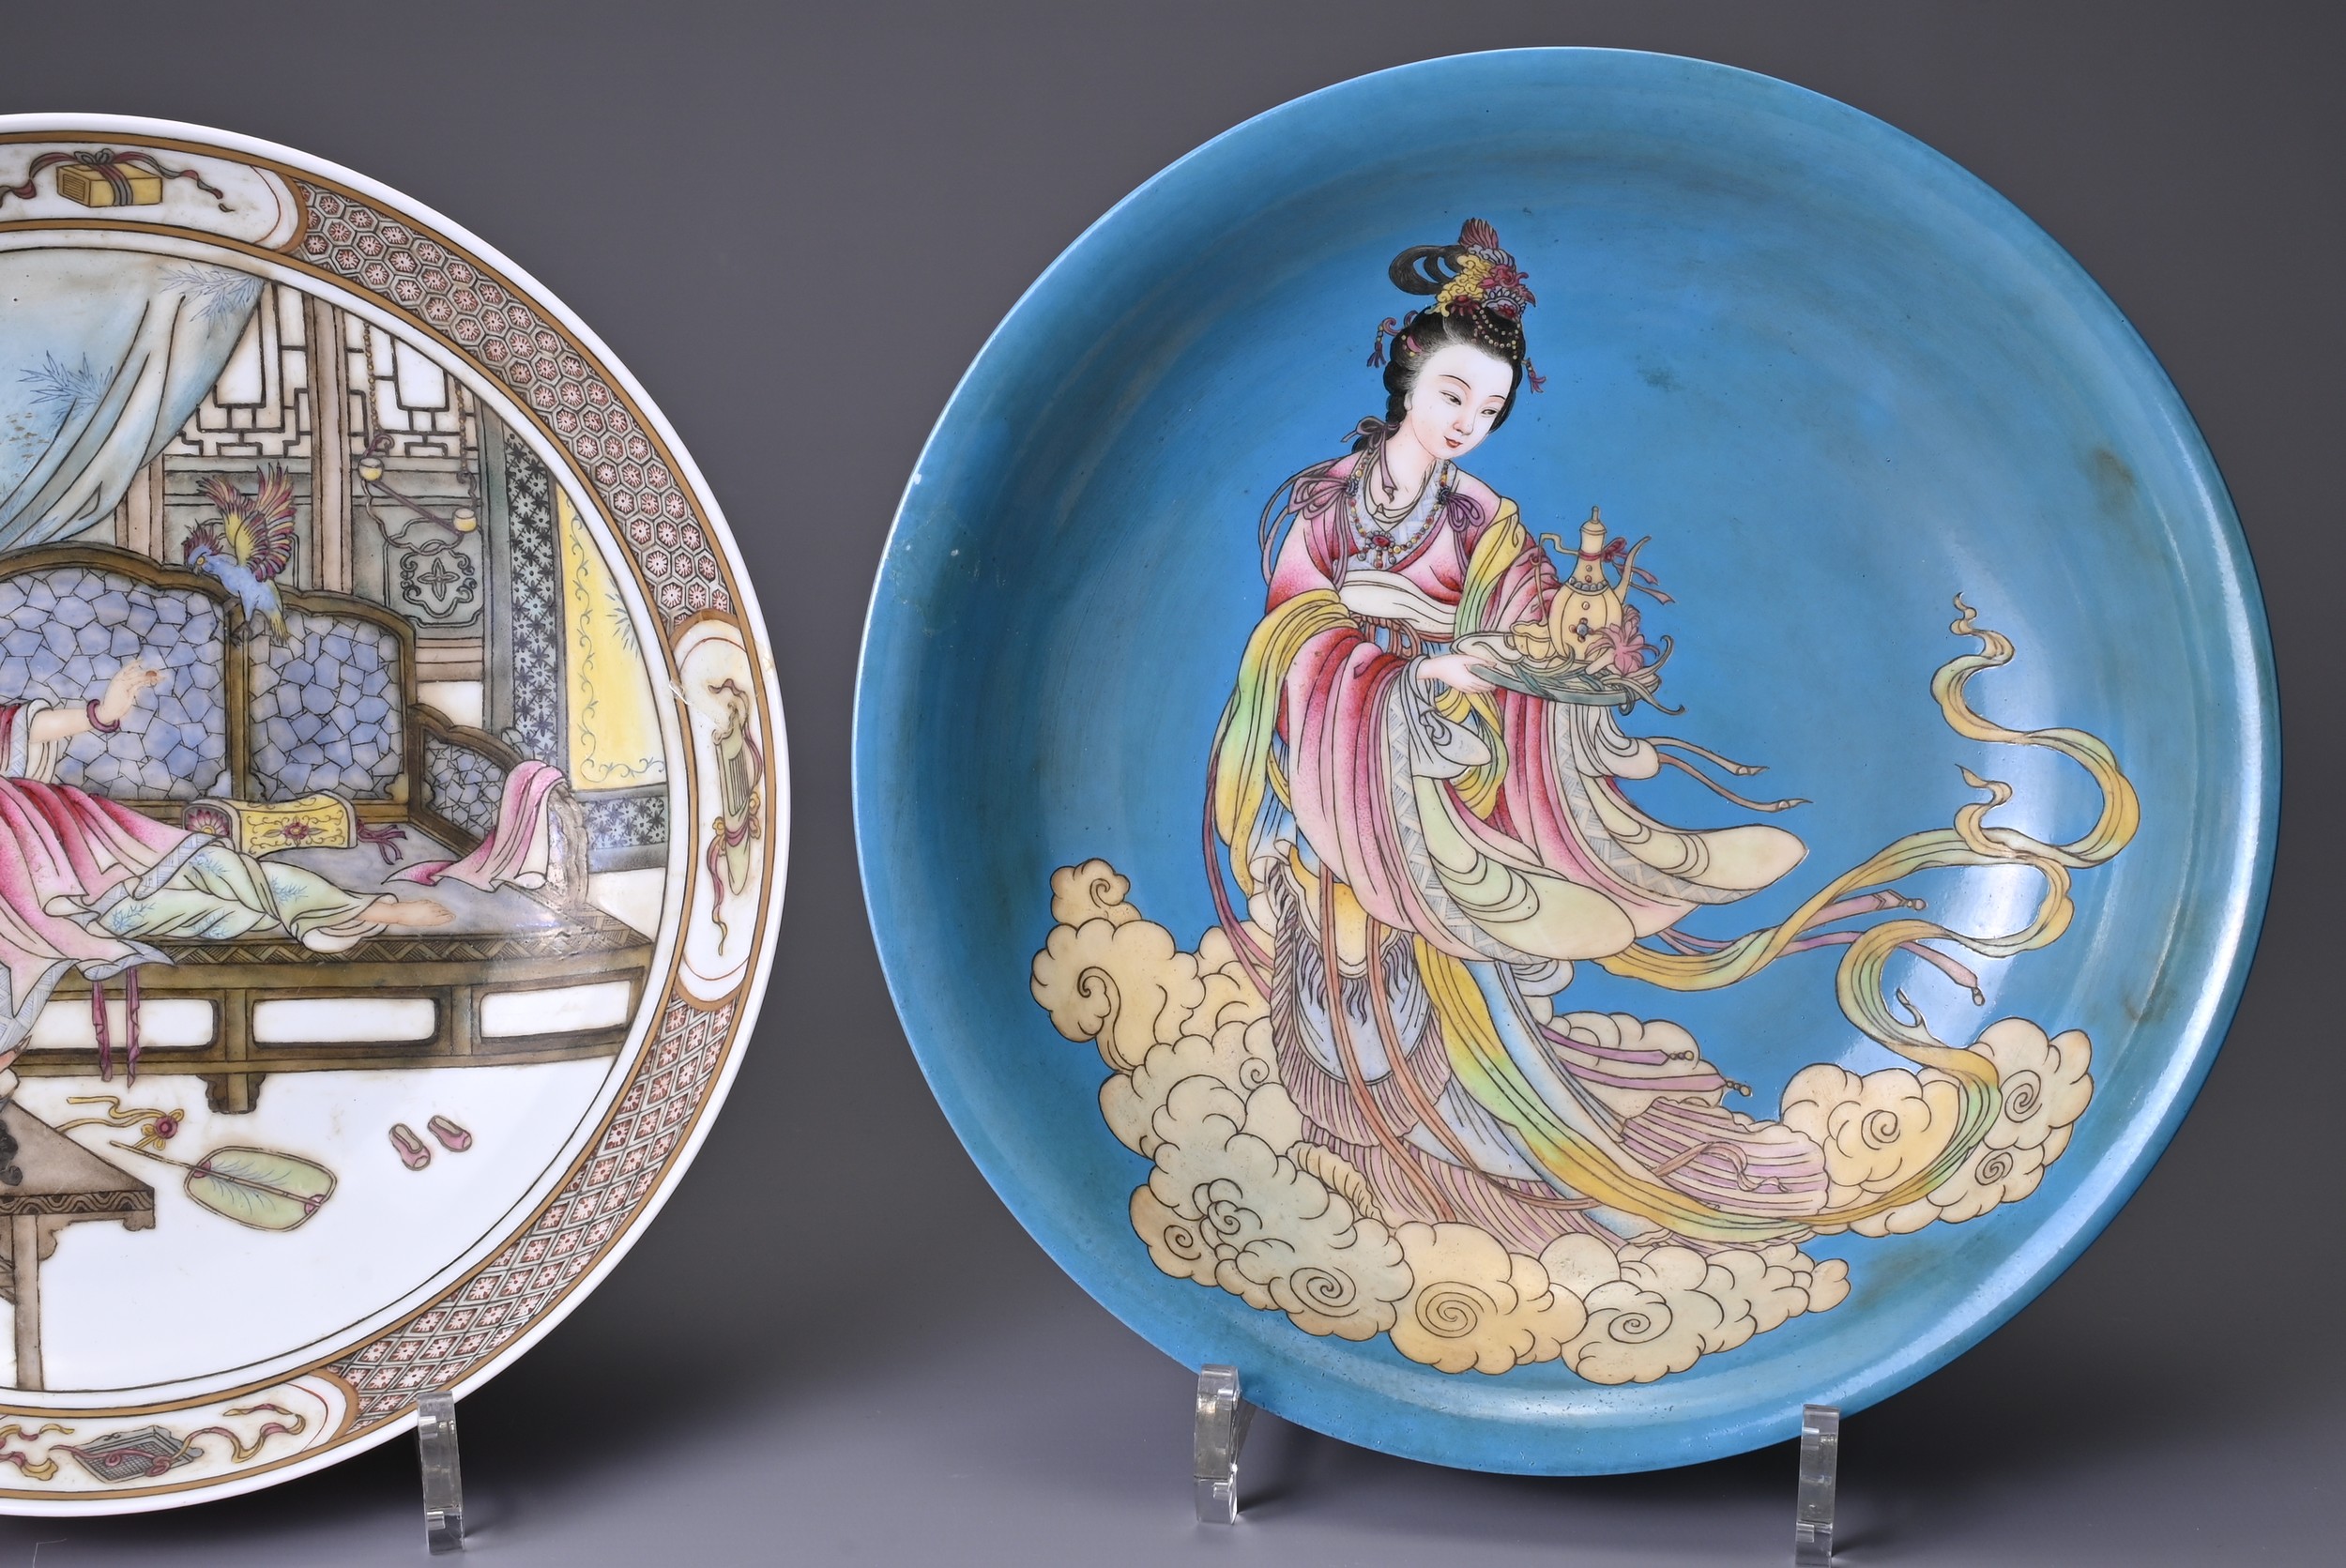 TWO CHINESE PORCELAIN FAMILLE ROSE CIRCULAR DISHES, 20TH CENTURY. Each with iron-red enamel and gilt - Image 3 of 7